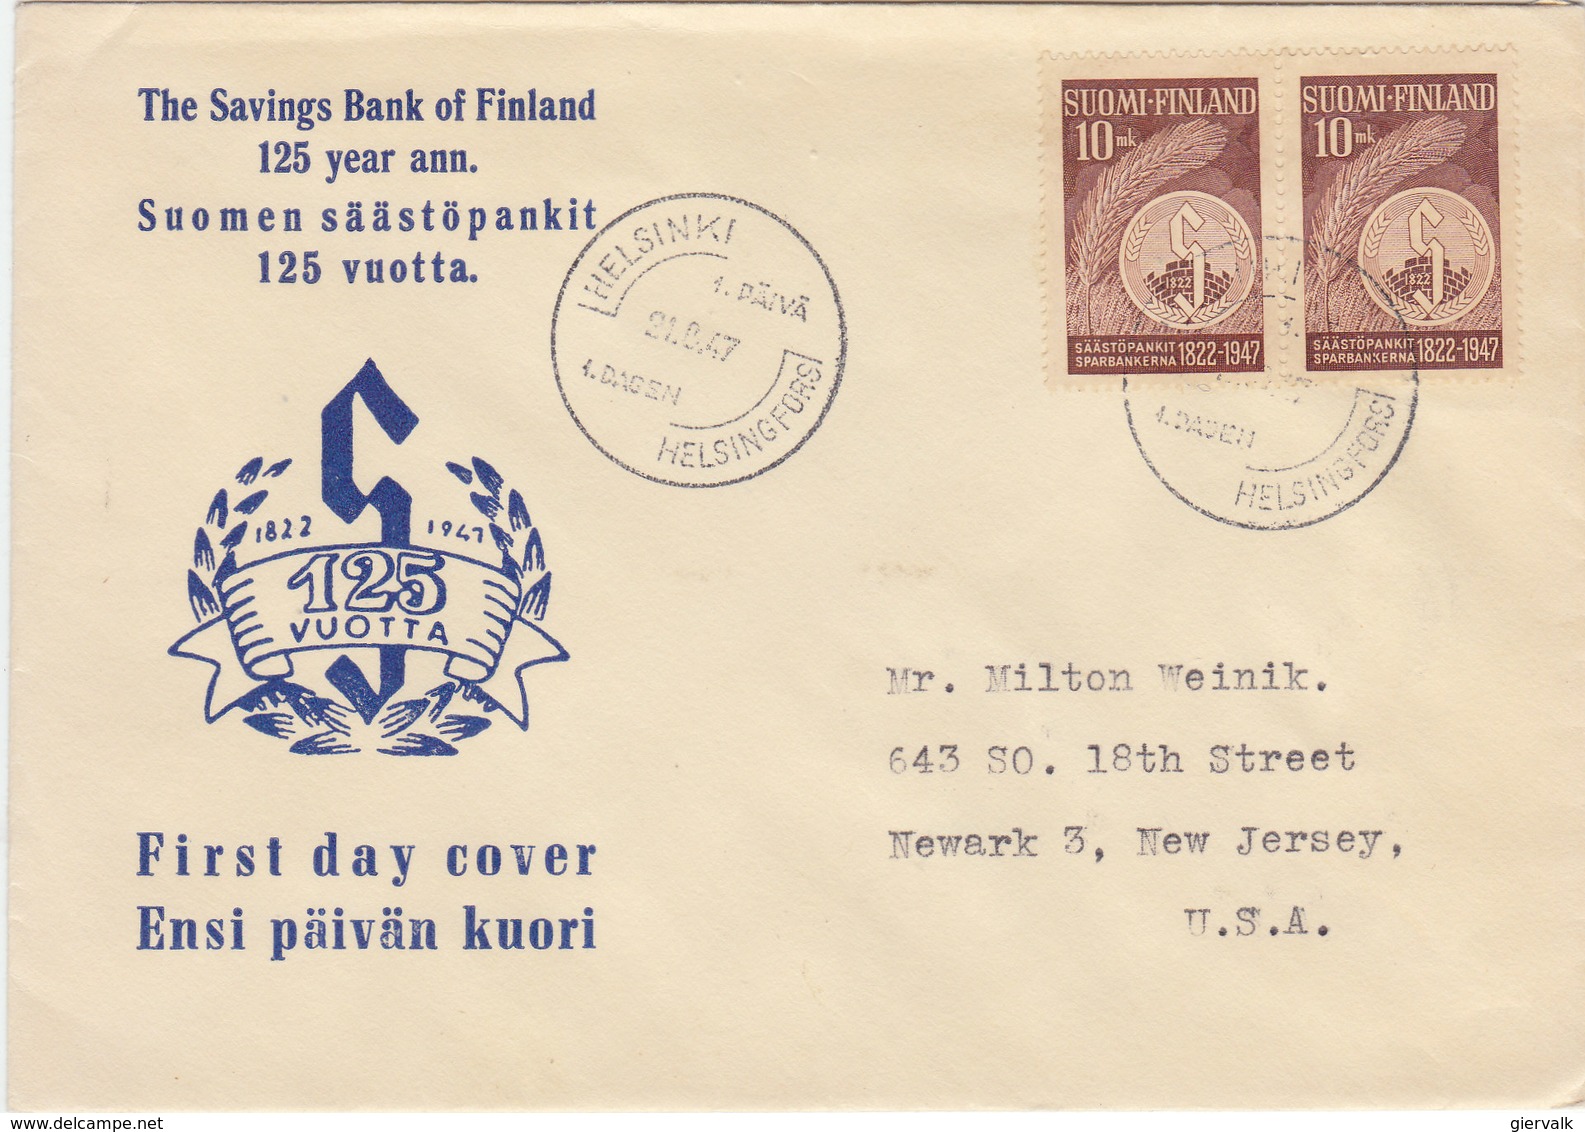 FINLAND 1947 FDC 125 Years Savings Bank Of Finland.BARGAIN.!! - FDC